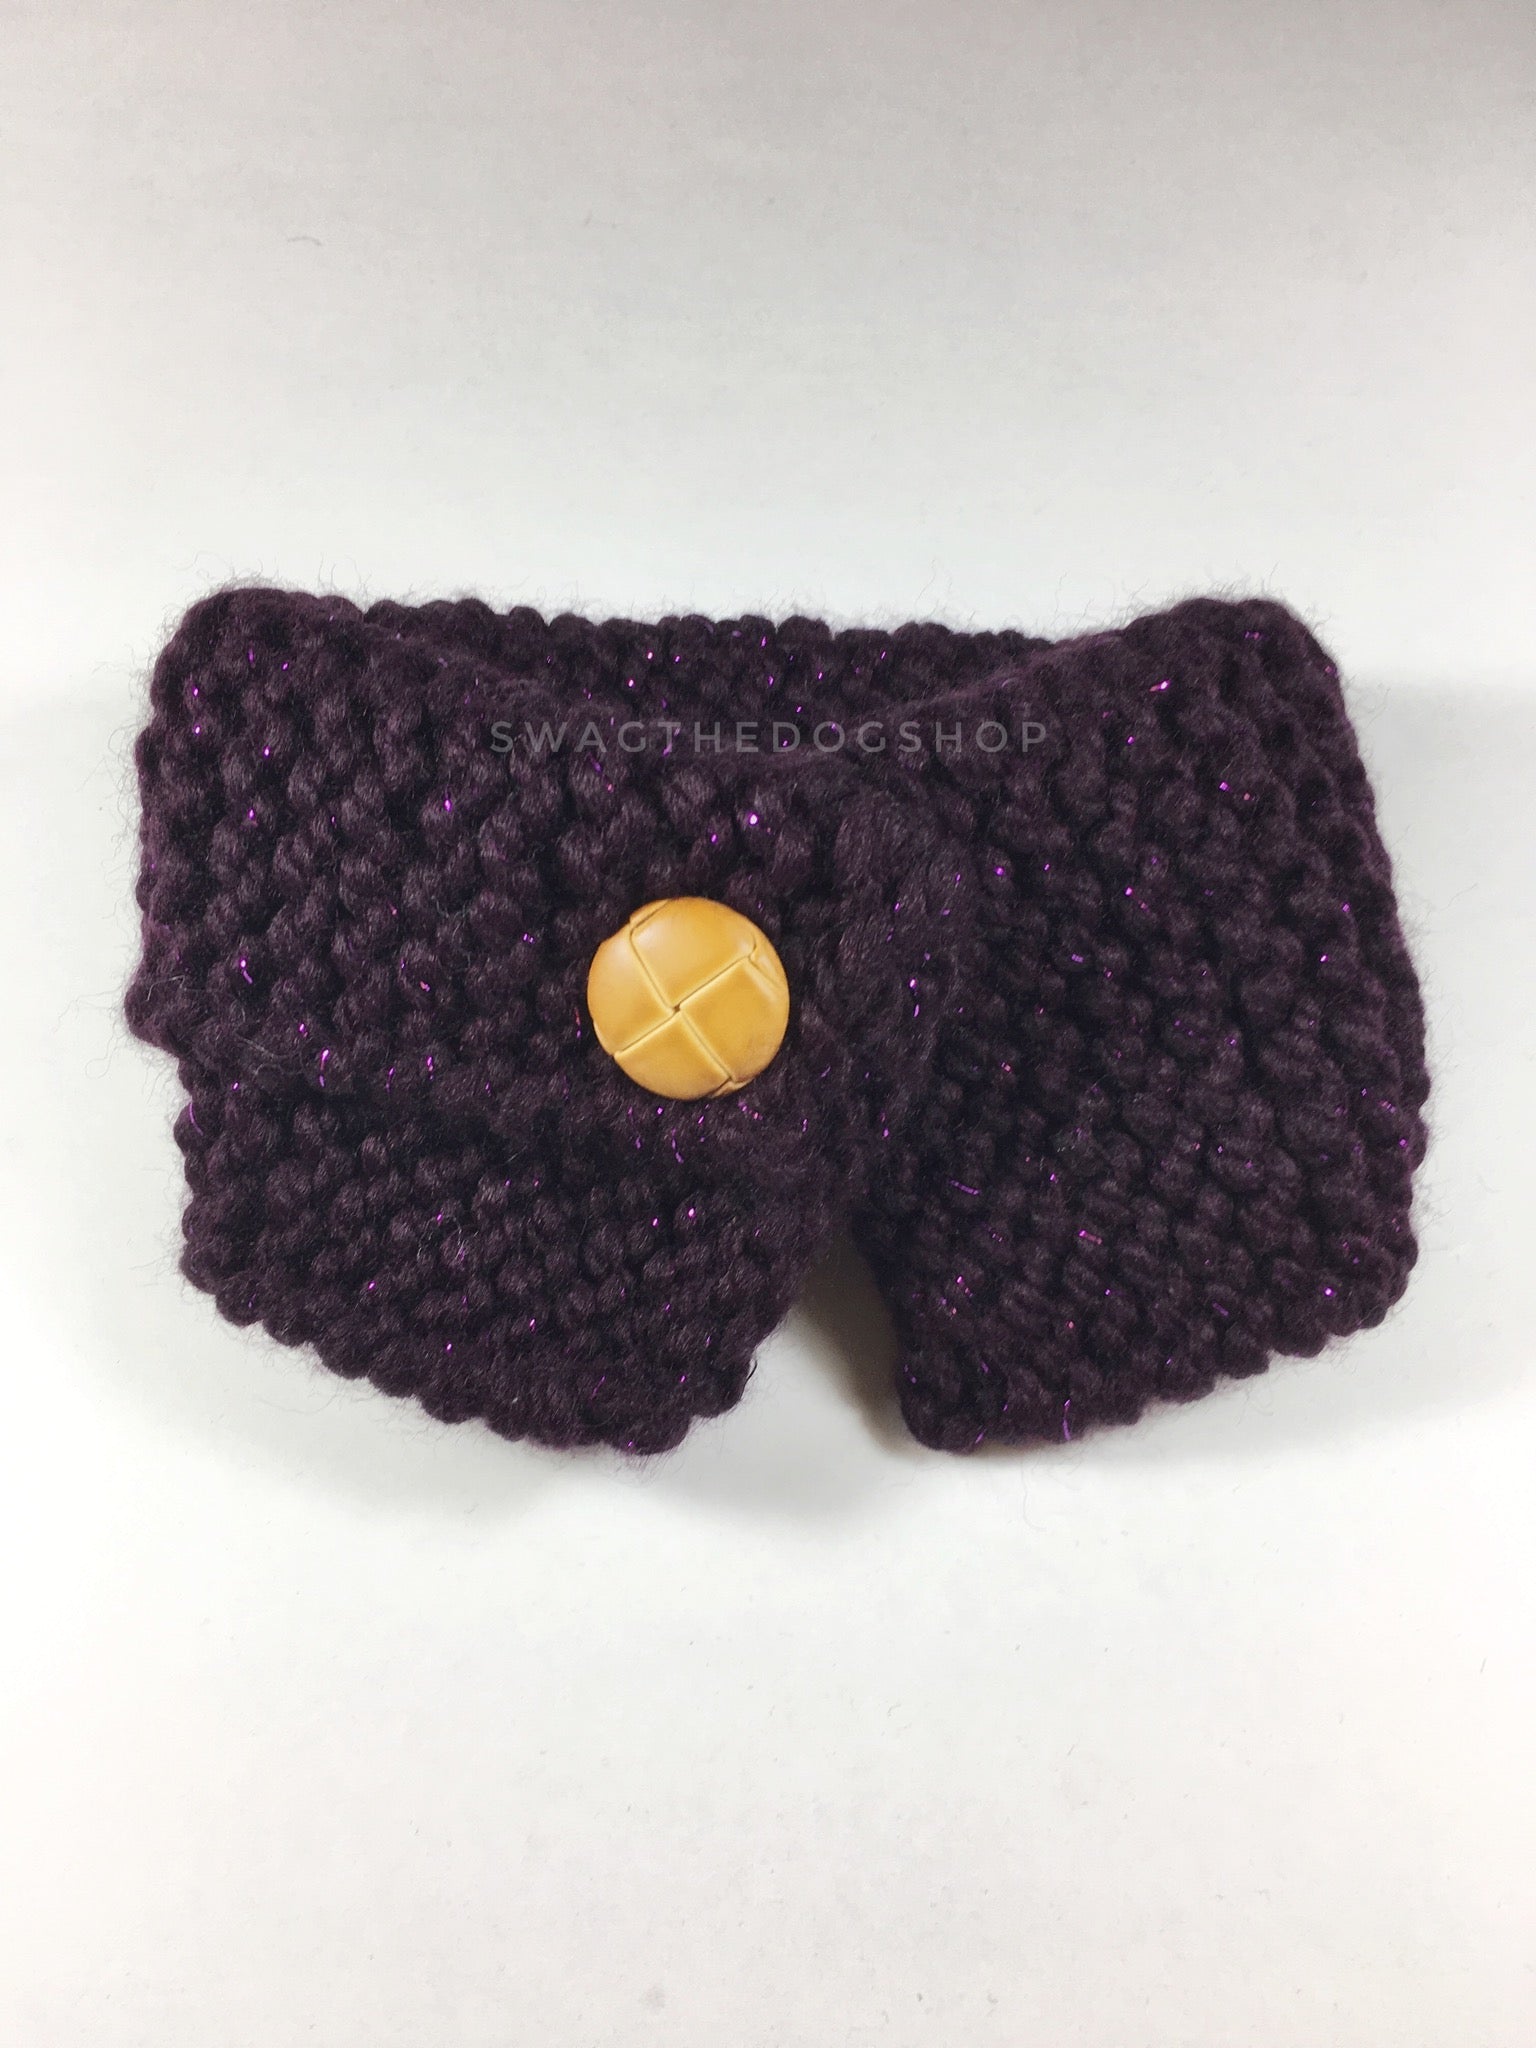 Galaxy Sparkle Swagsnood - Product Front View. Dark Purple with Sparkle Thread Color Dog Snood with Accent Button